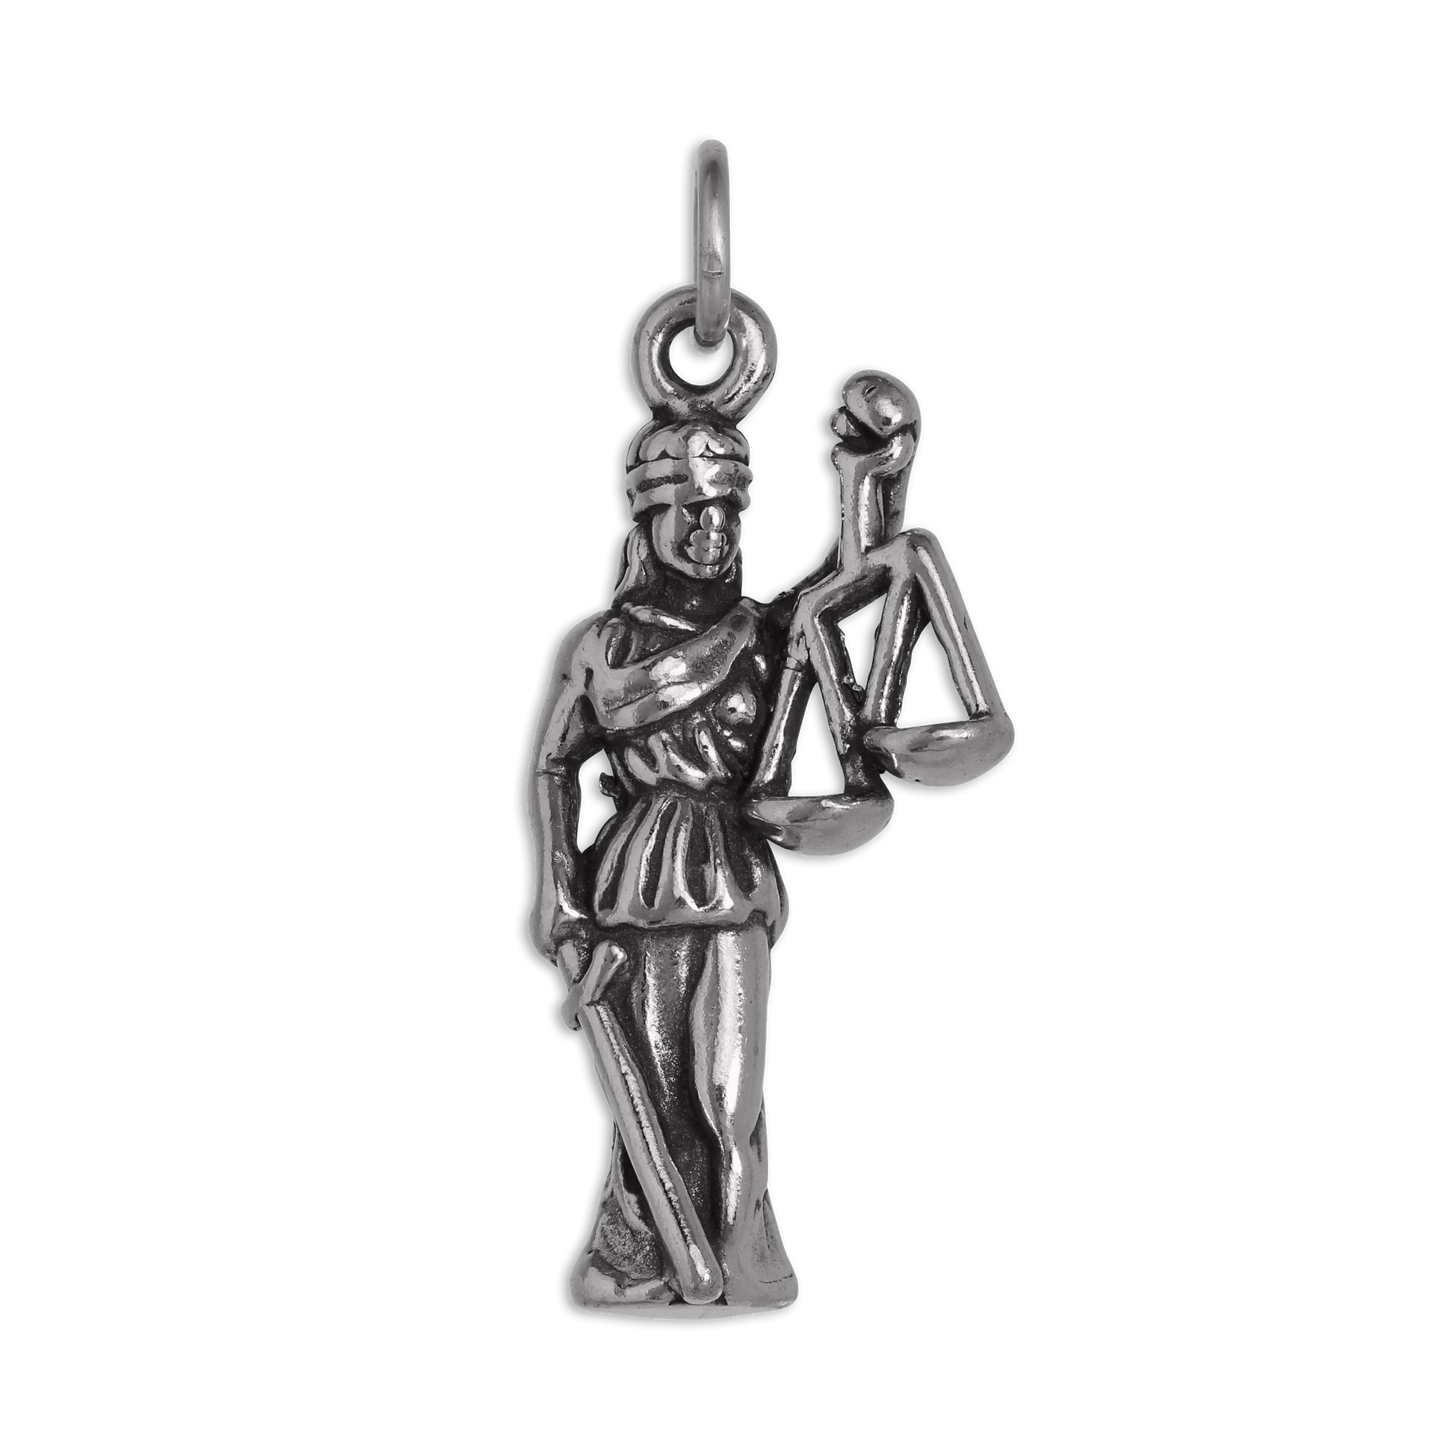 Sterling Silver Lady Justice Charm